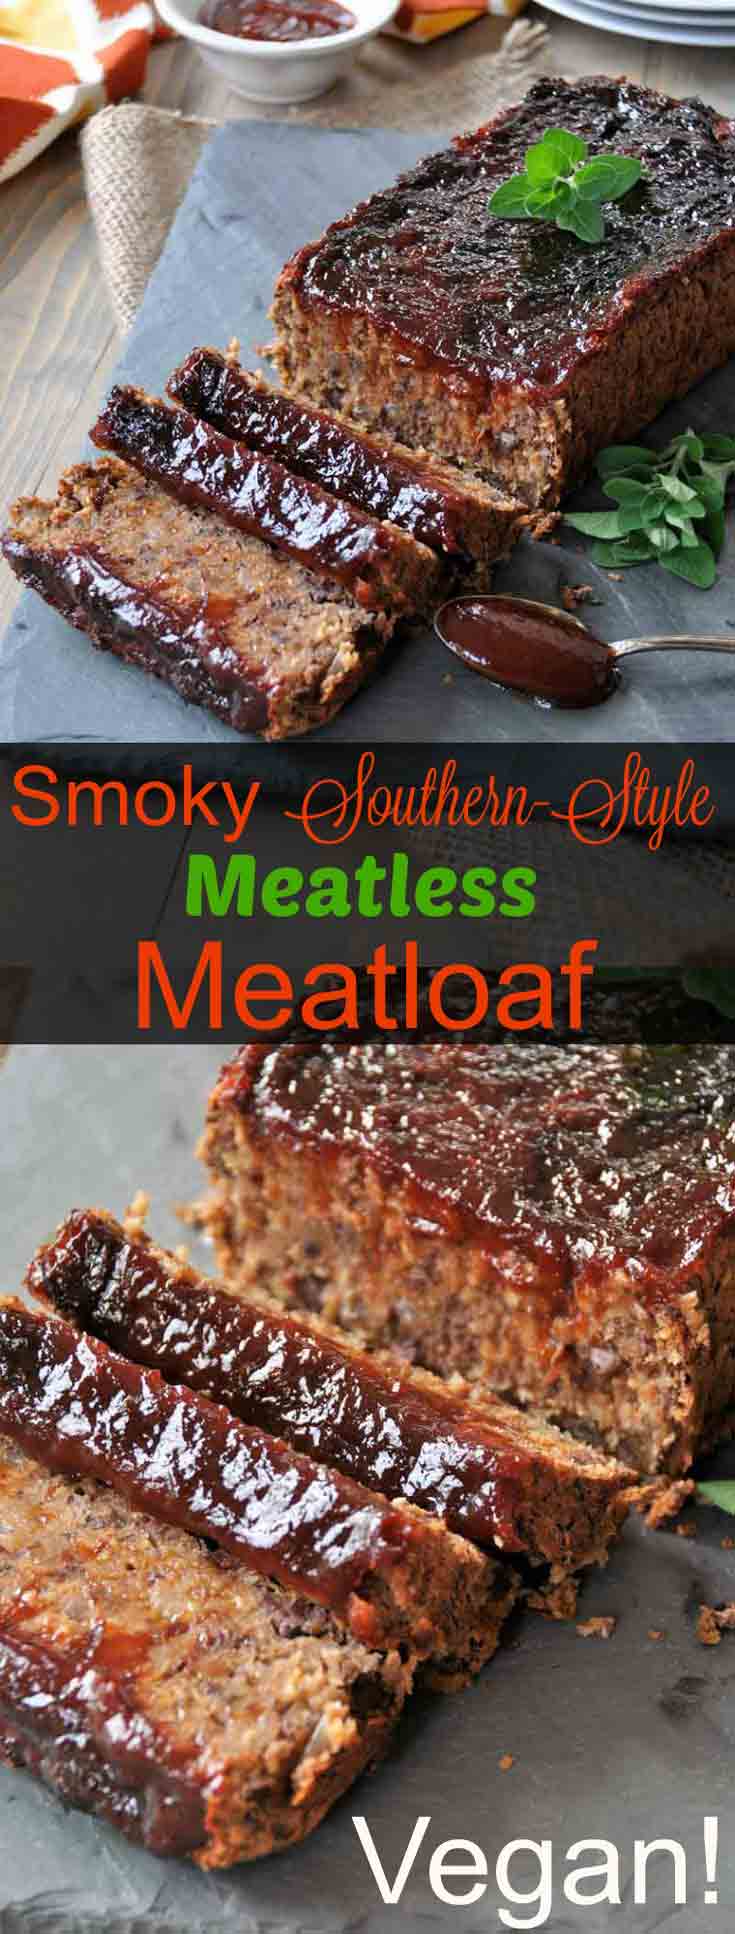 Vegan meatloaf that's soy-free, dairy-free, and egg-free, but it's full of smoky BBQ flavor. www.veganosity.com